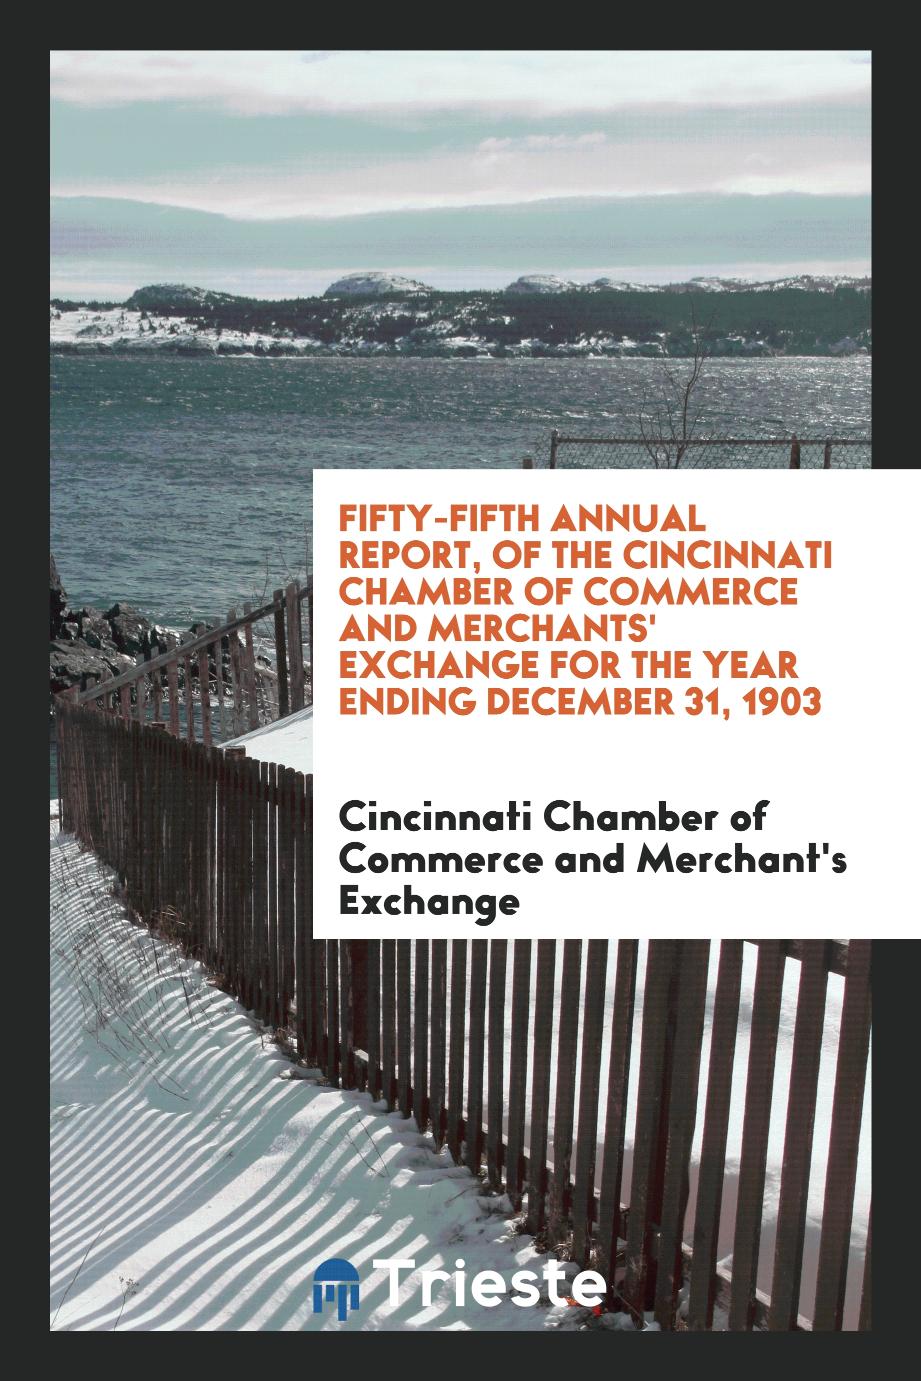 Fifty-Fifth Annual Report, of the Cincinnati Chamber of Commerce and Merchants' Exchange for the Year Ending December 31, 1903